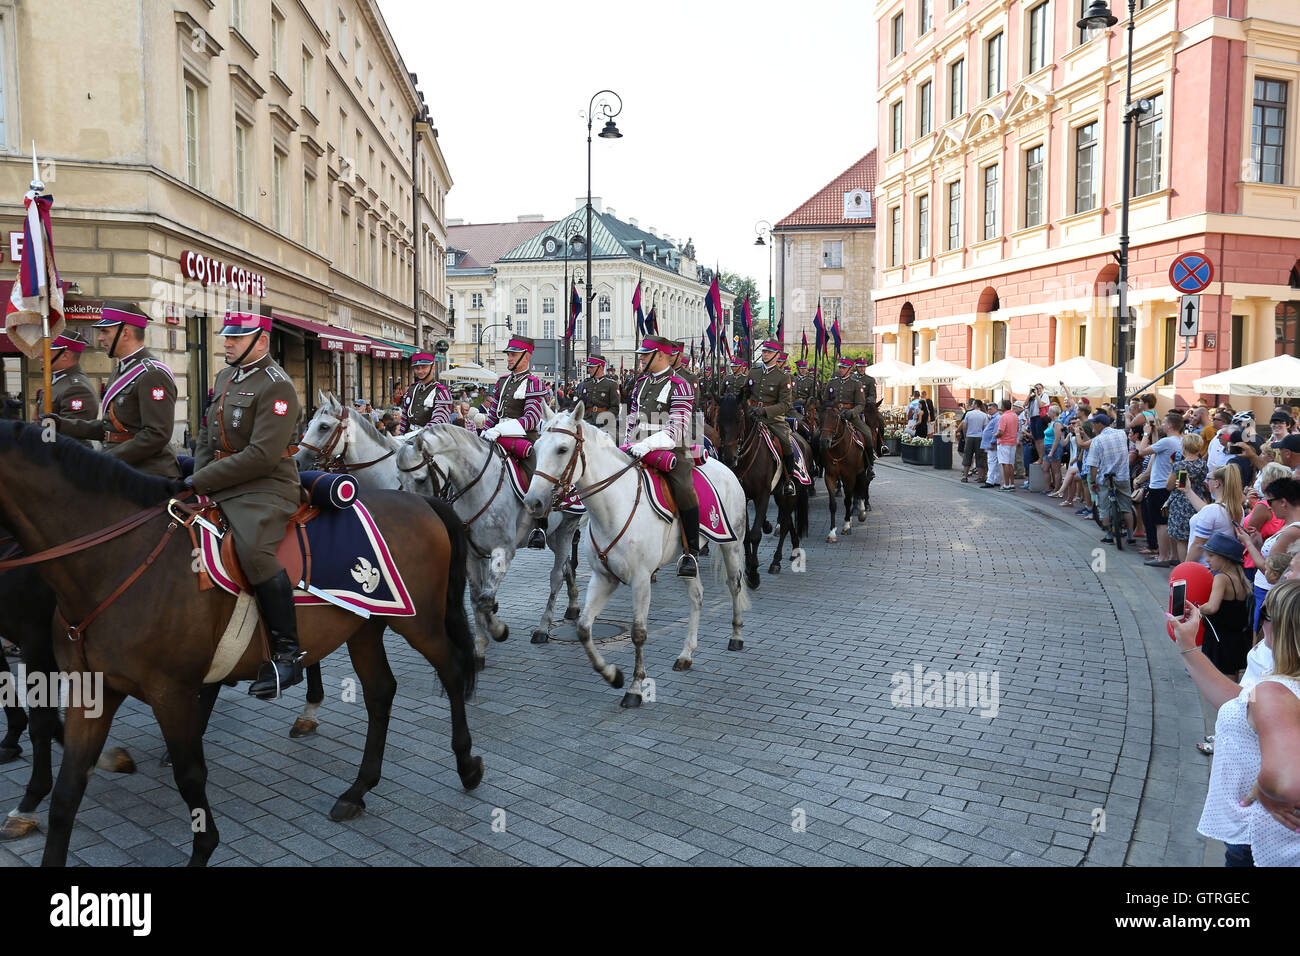 Poland, Warsaw, 10th September 2016: Polish army held Cavalry Celebration Day in Warsaw. The General of the Garrison of Warsaw led the ceremony at the Tomb of the Unknown Soldier after several cavalry units took a ride through Old Town of Warsaw. During celebrations a horse collapsed of the hot temperature in the capitol. Credit:  Madeleine Ratz/Alamy Live News Stock Photo